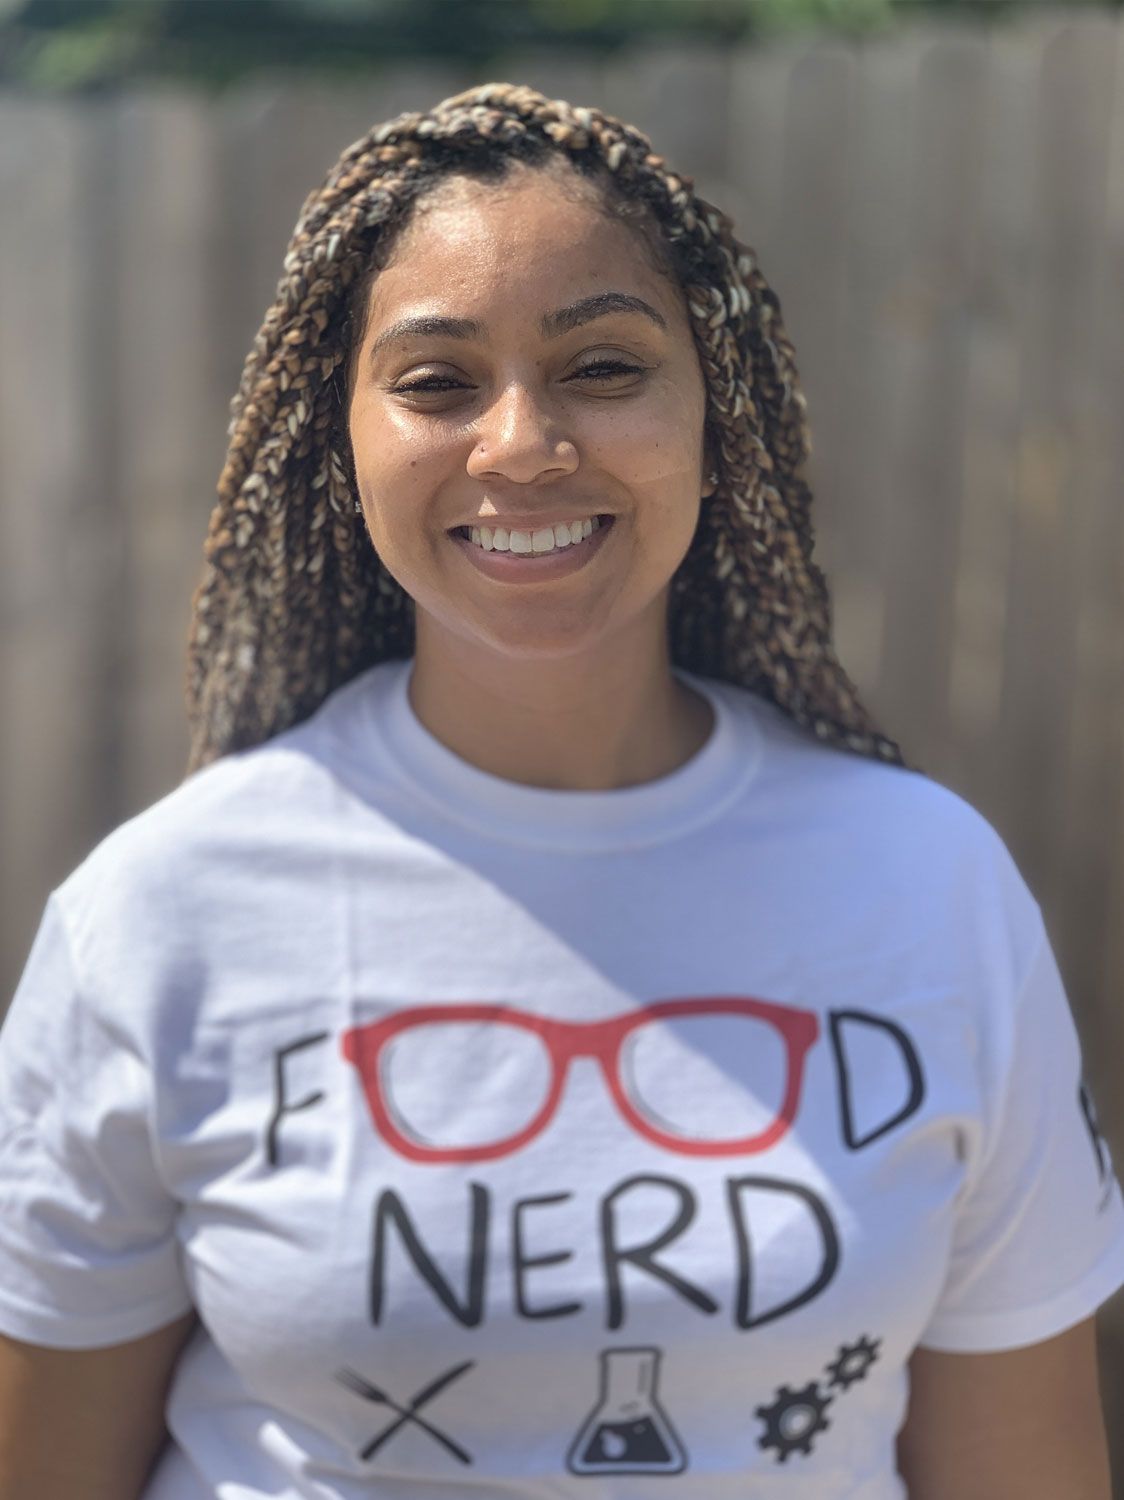 A t-shirt with the Food Nerd logo